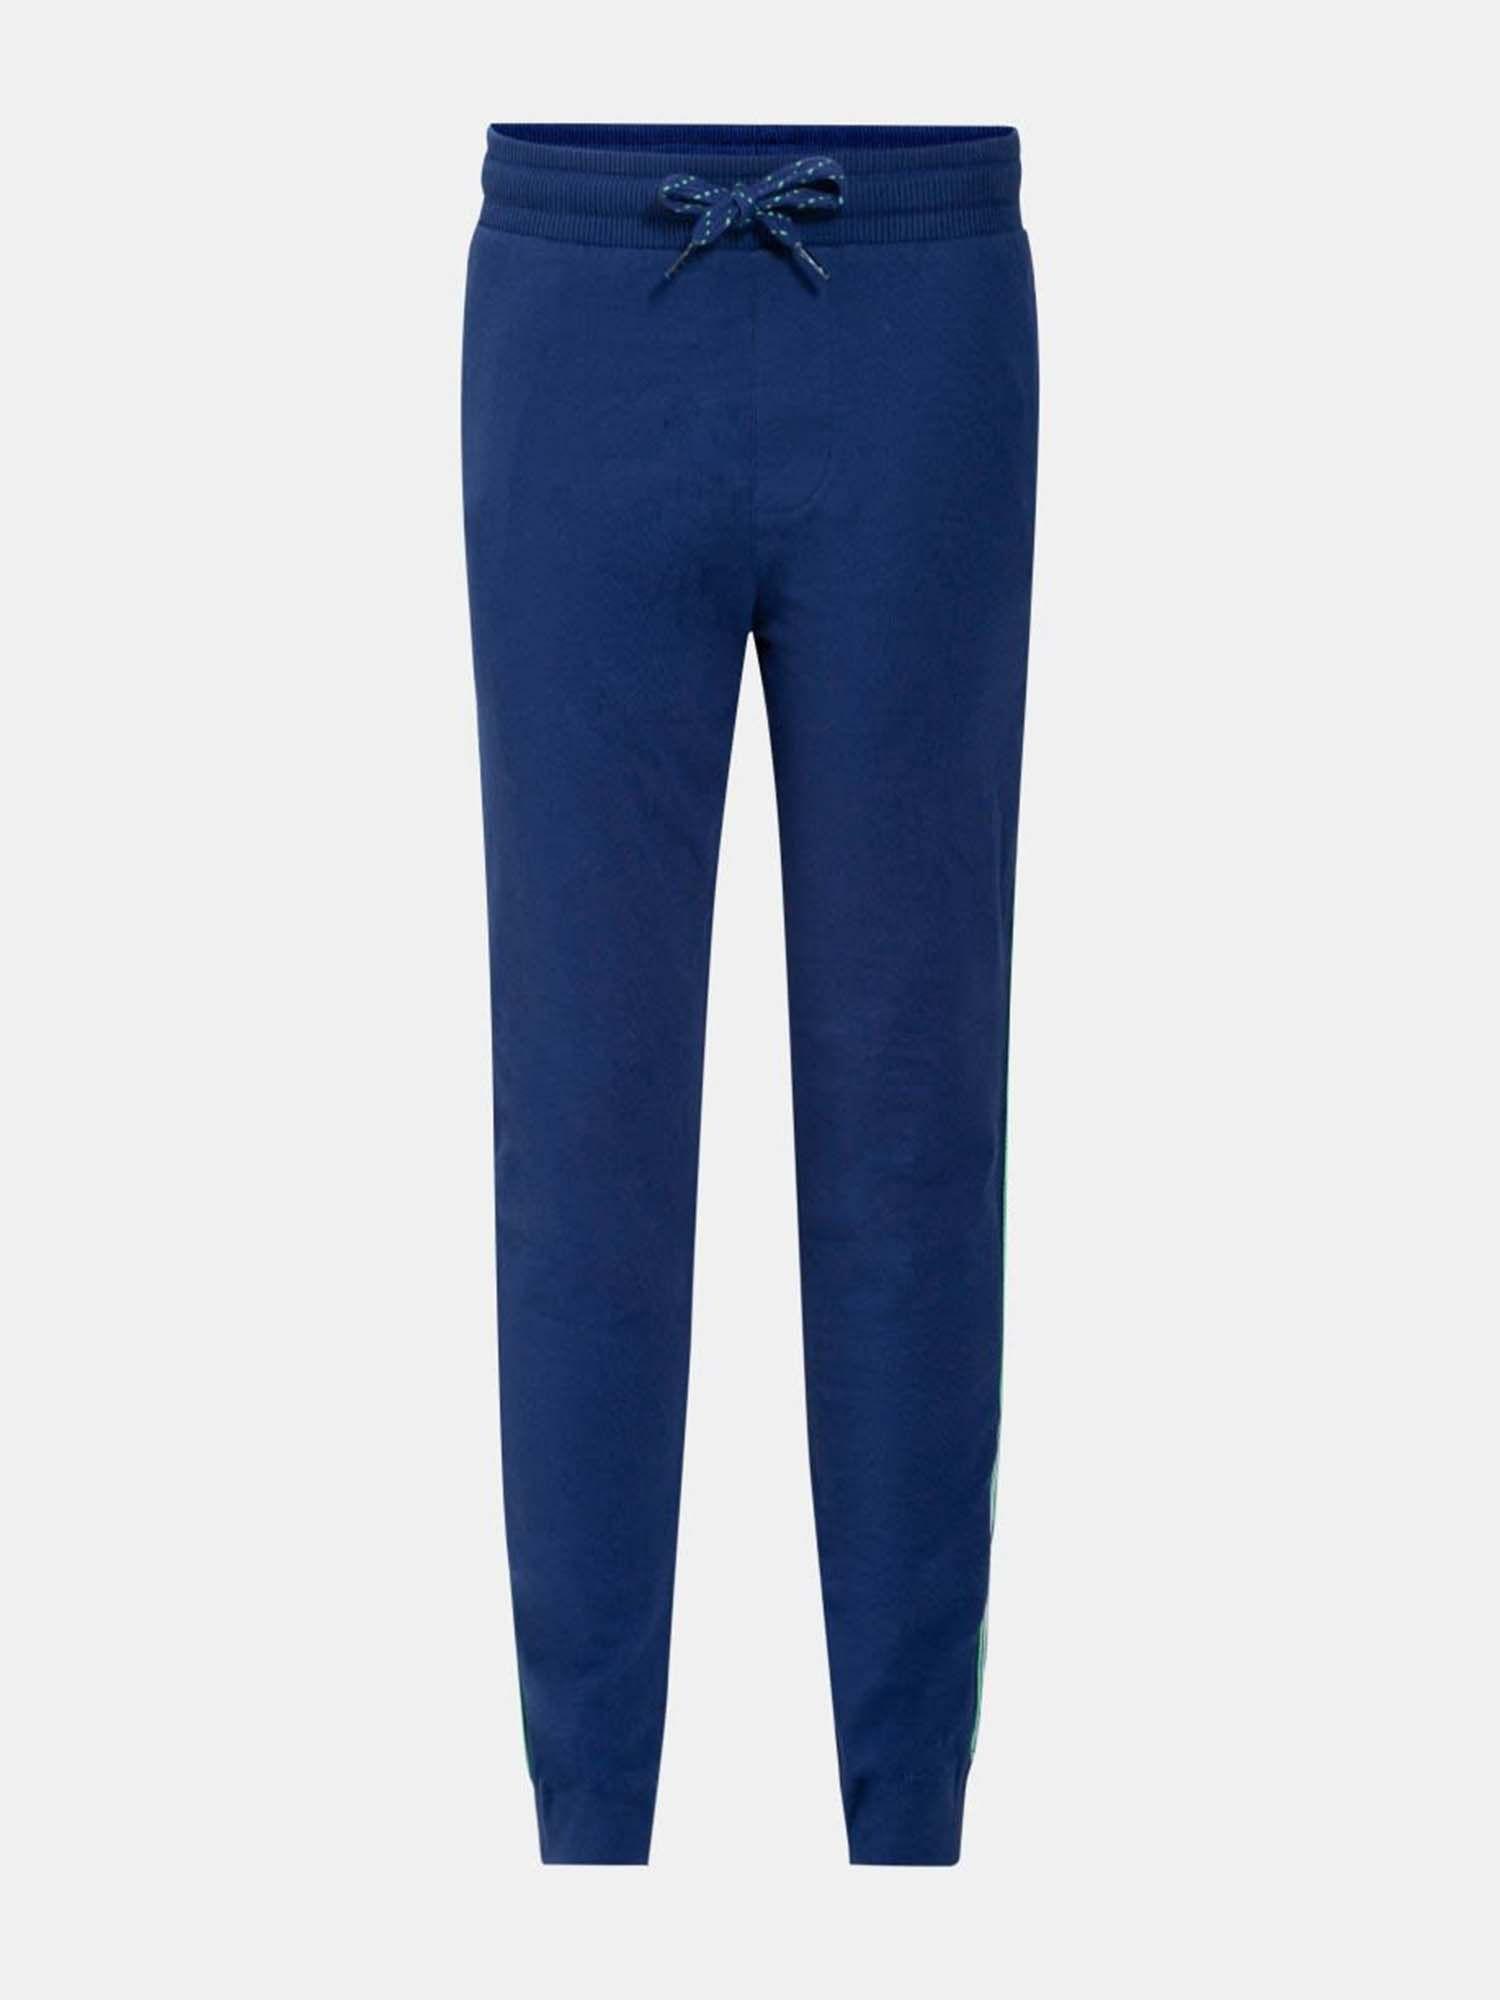 blue depth track pant - style number - (ab31)